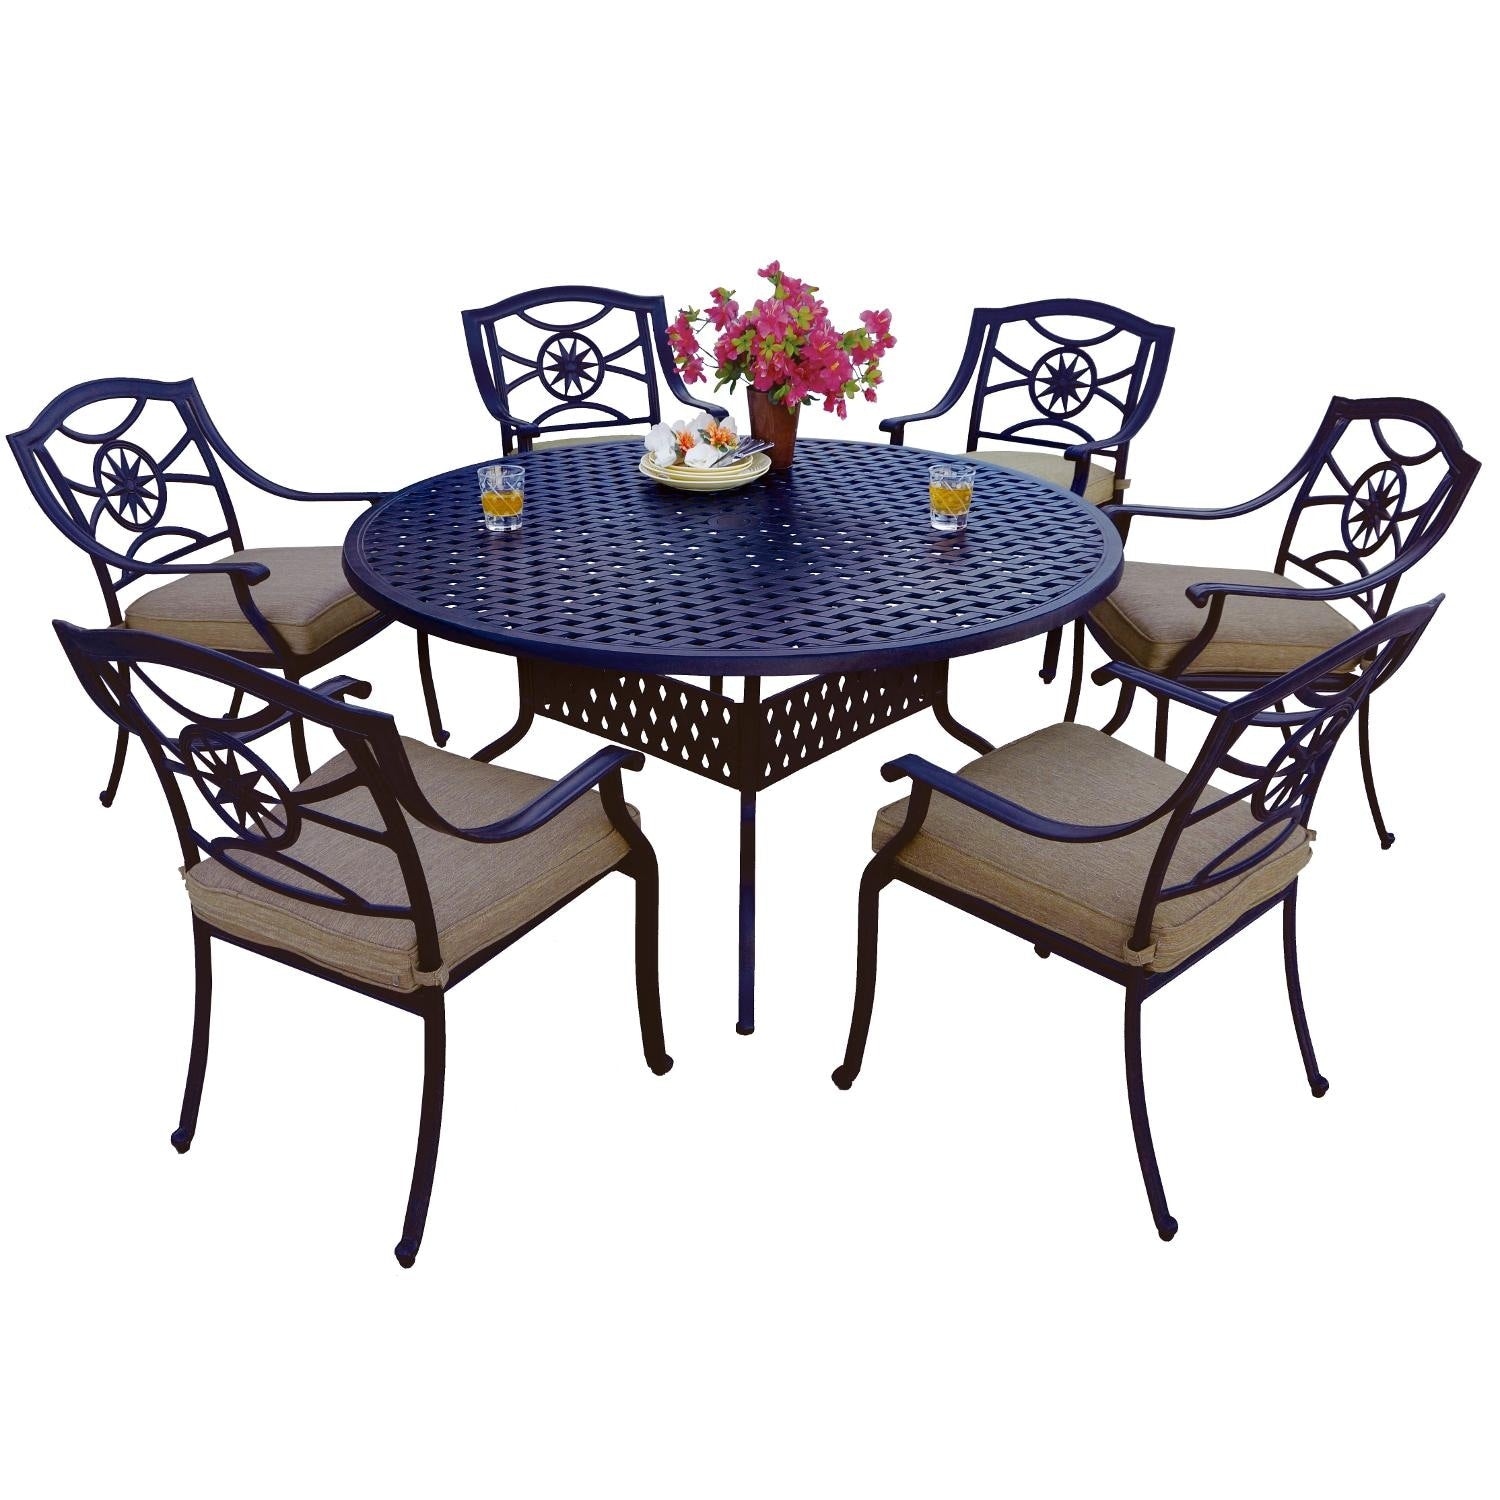 Darlee - Ten Star 7-Piece Patio Dining Set with Cushions and 60'' Round Dining Table  - DL503-7PC-30D